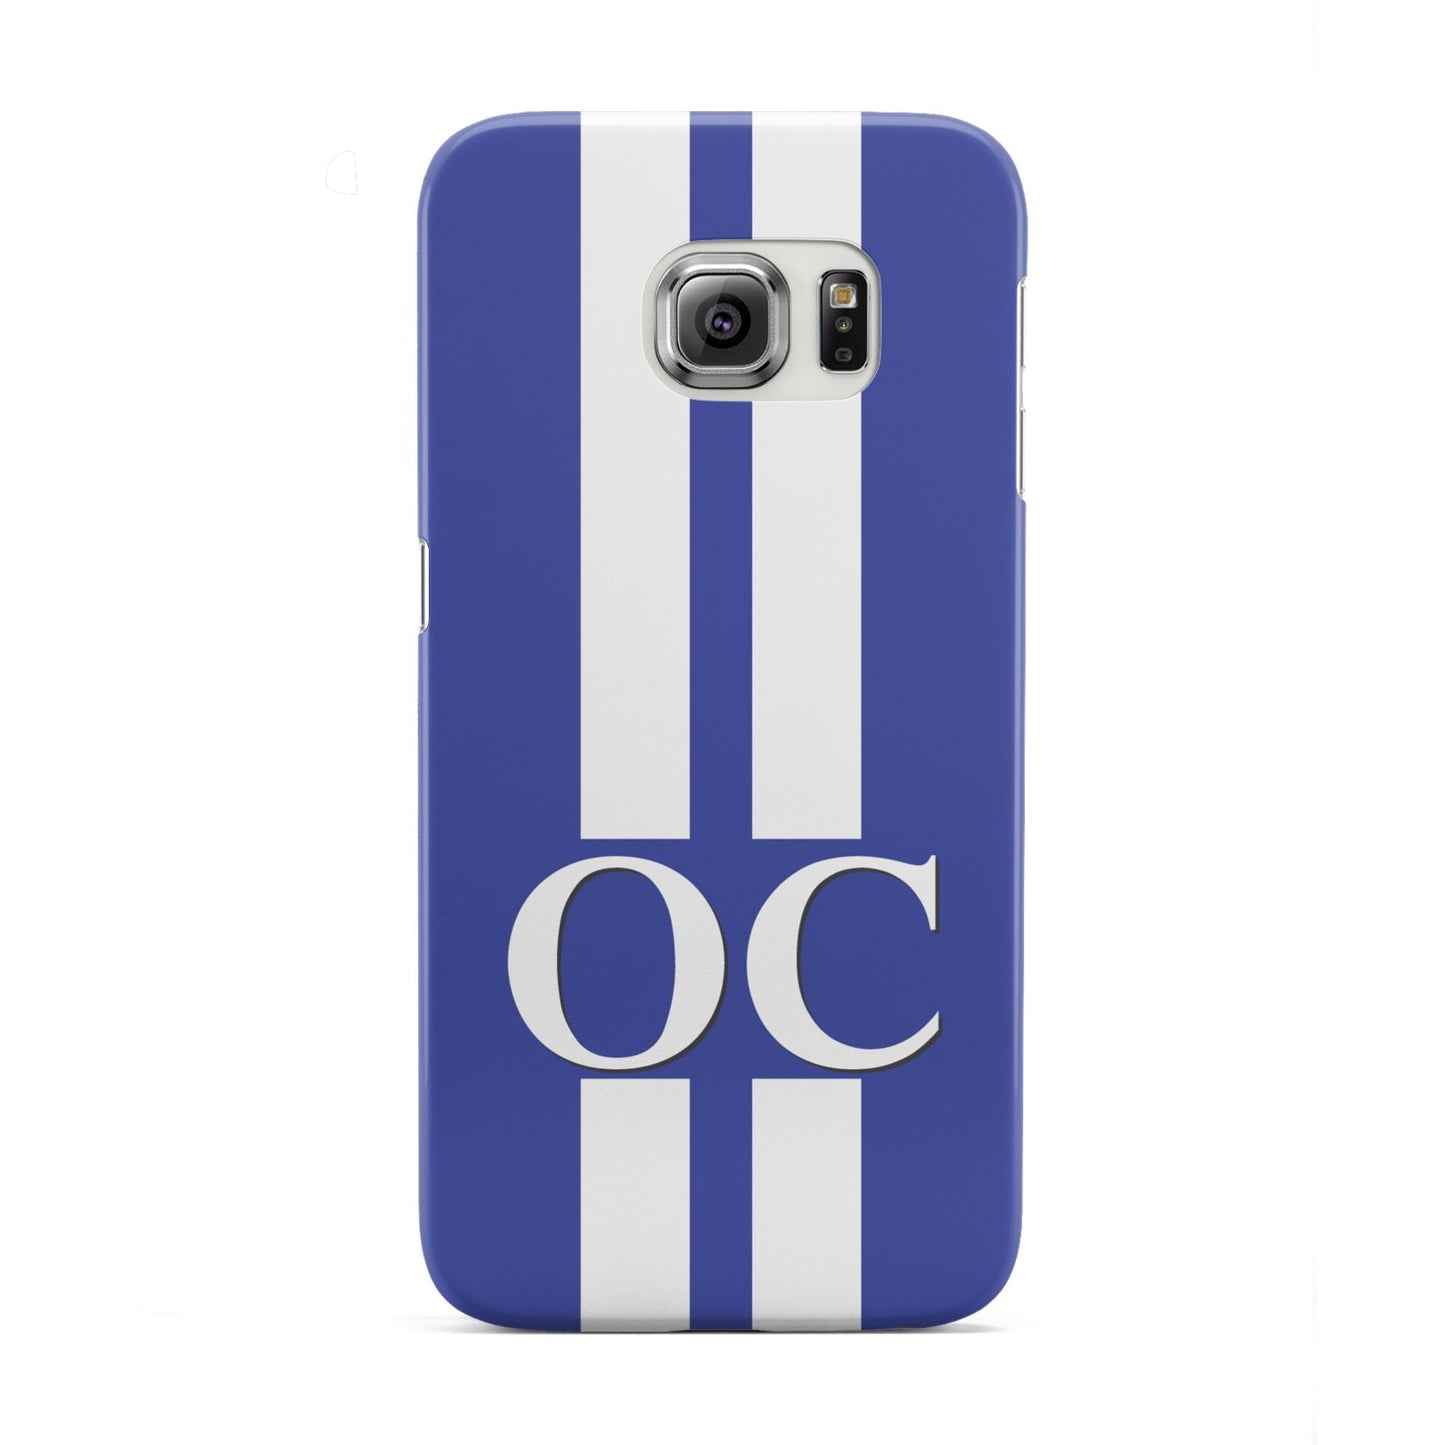 Blue Personalised Initials Samsung Galaxy S6 Edge Case